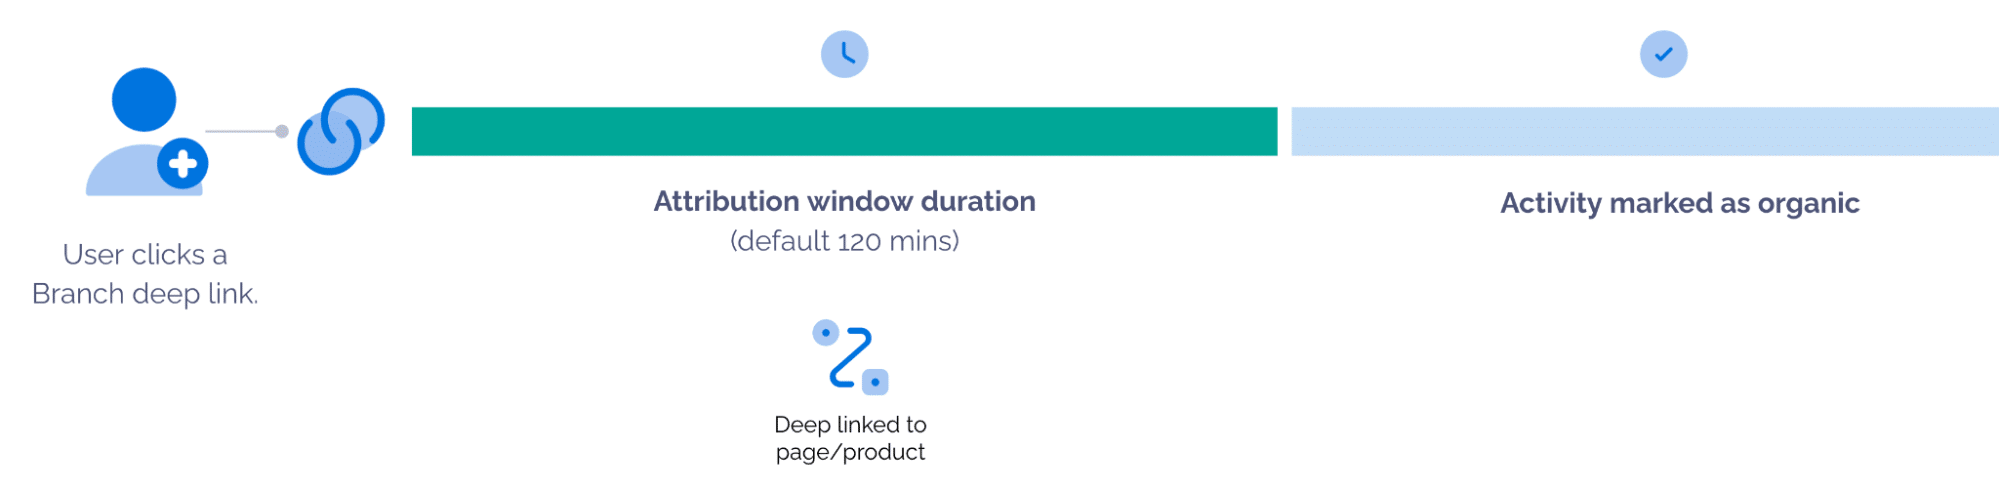 Visual representation of deep linking attribution windows. After an attribution window duration ends, users will not be taken to specific app content. 